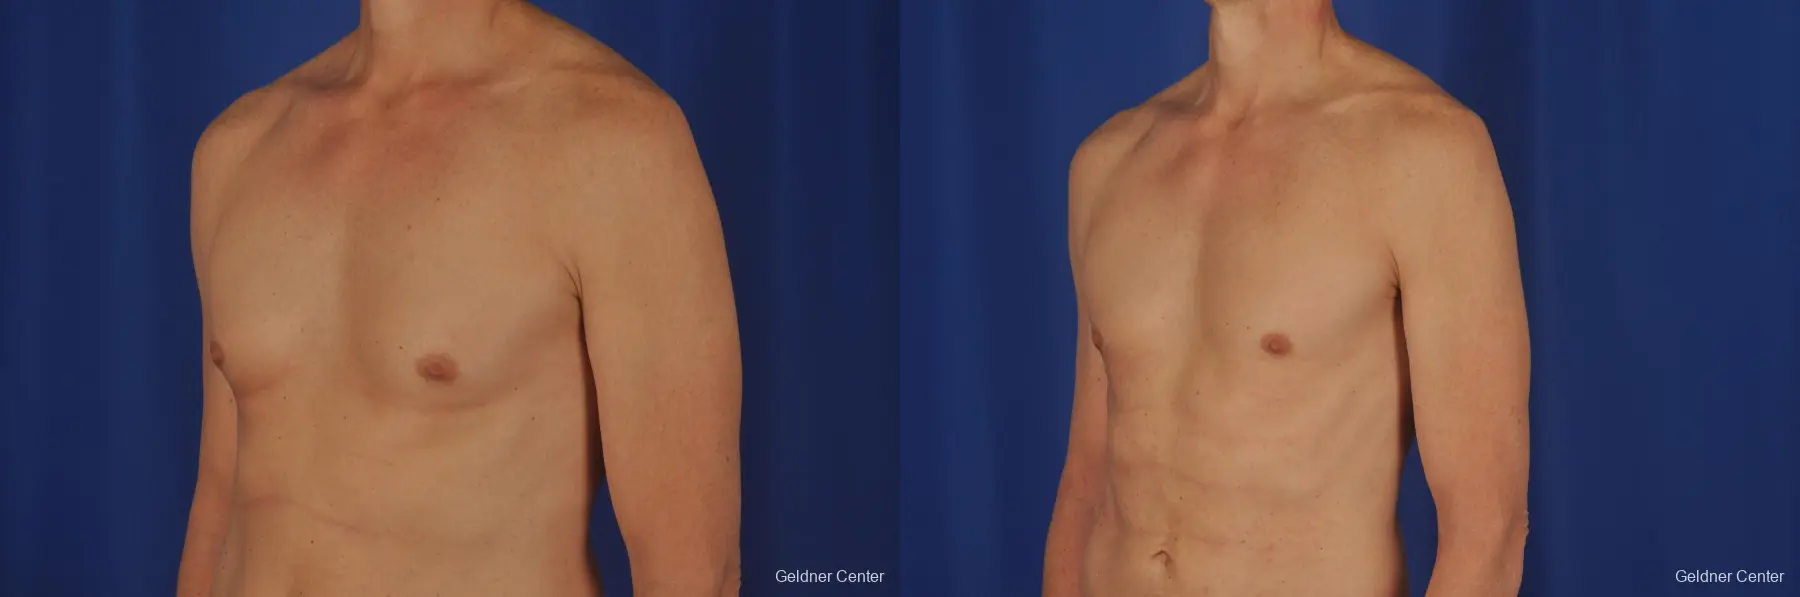 Gynecomastia: Patient 2 - Before and After 4